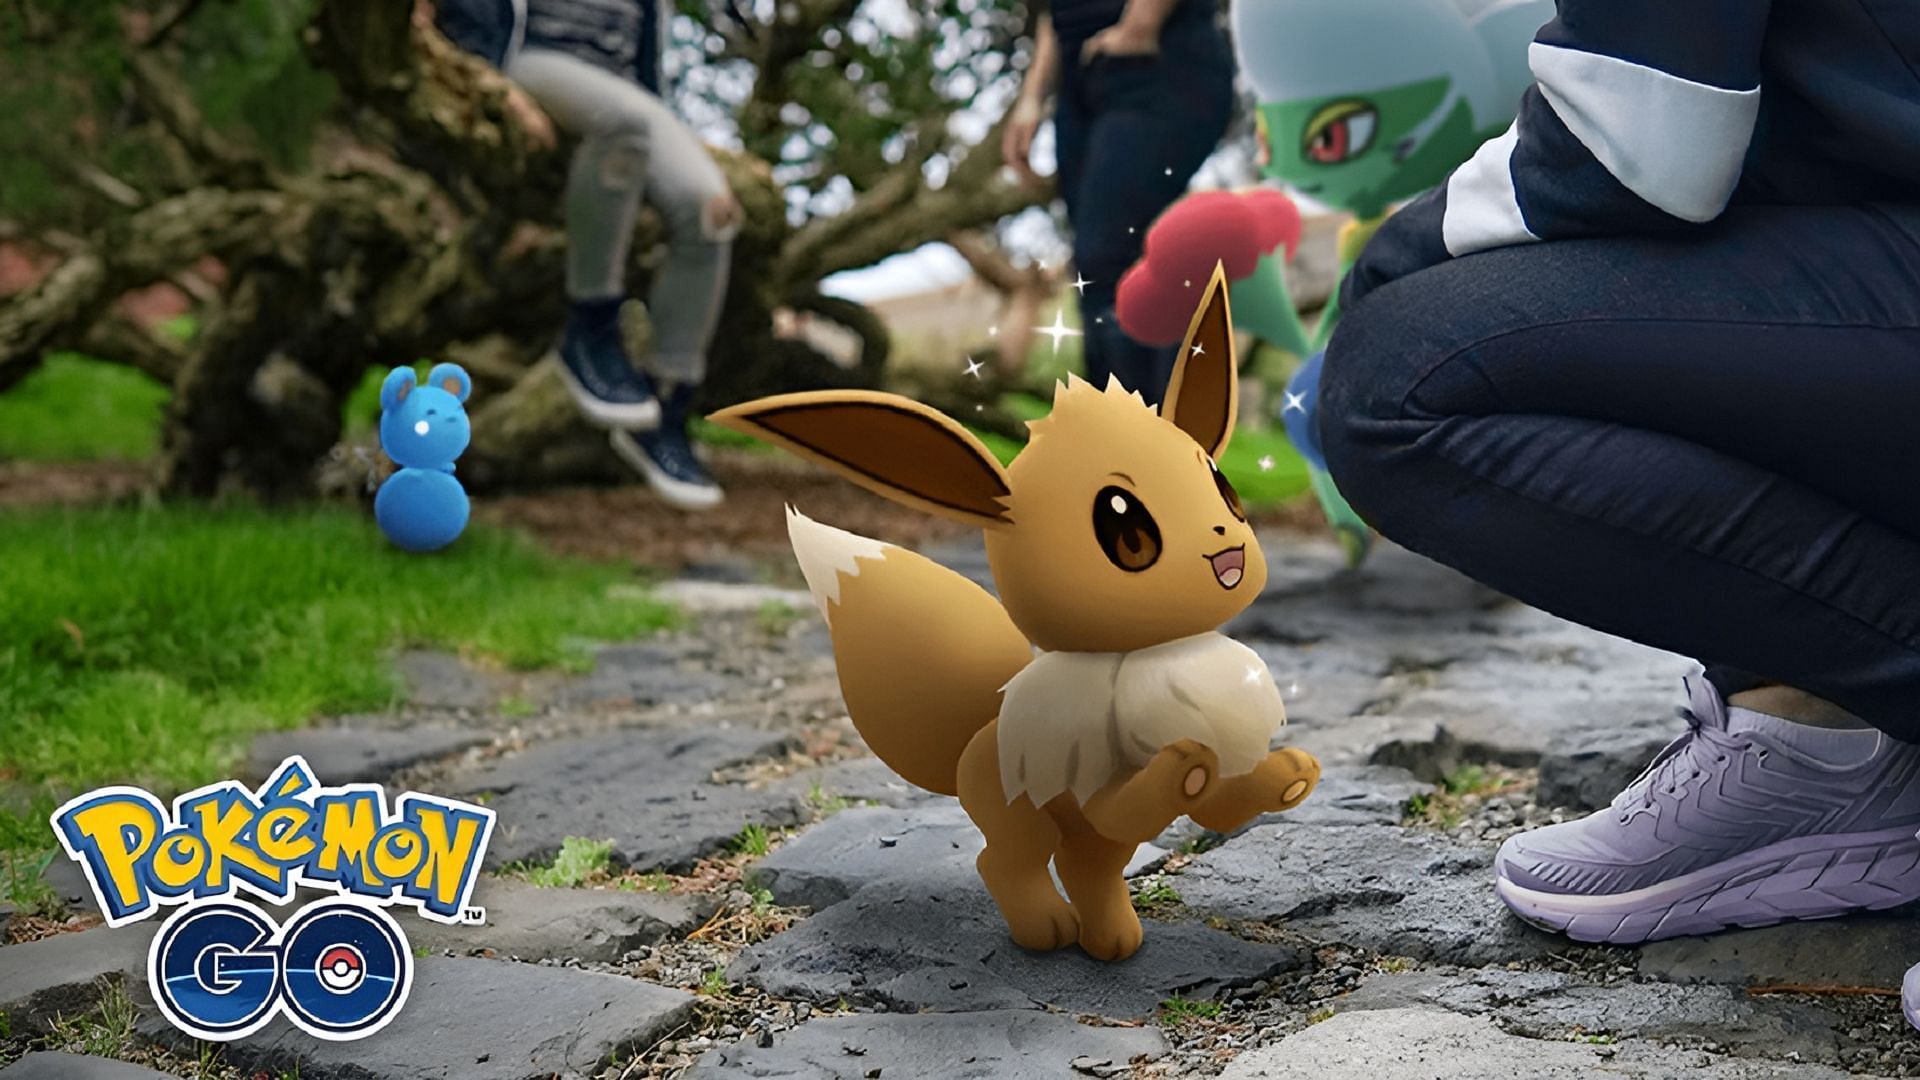 Using buddies wisely is the key to collecting souvenirs in Pokemon GO (Image via Niantic)